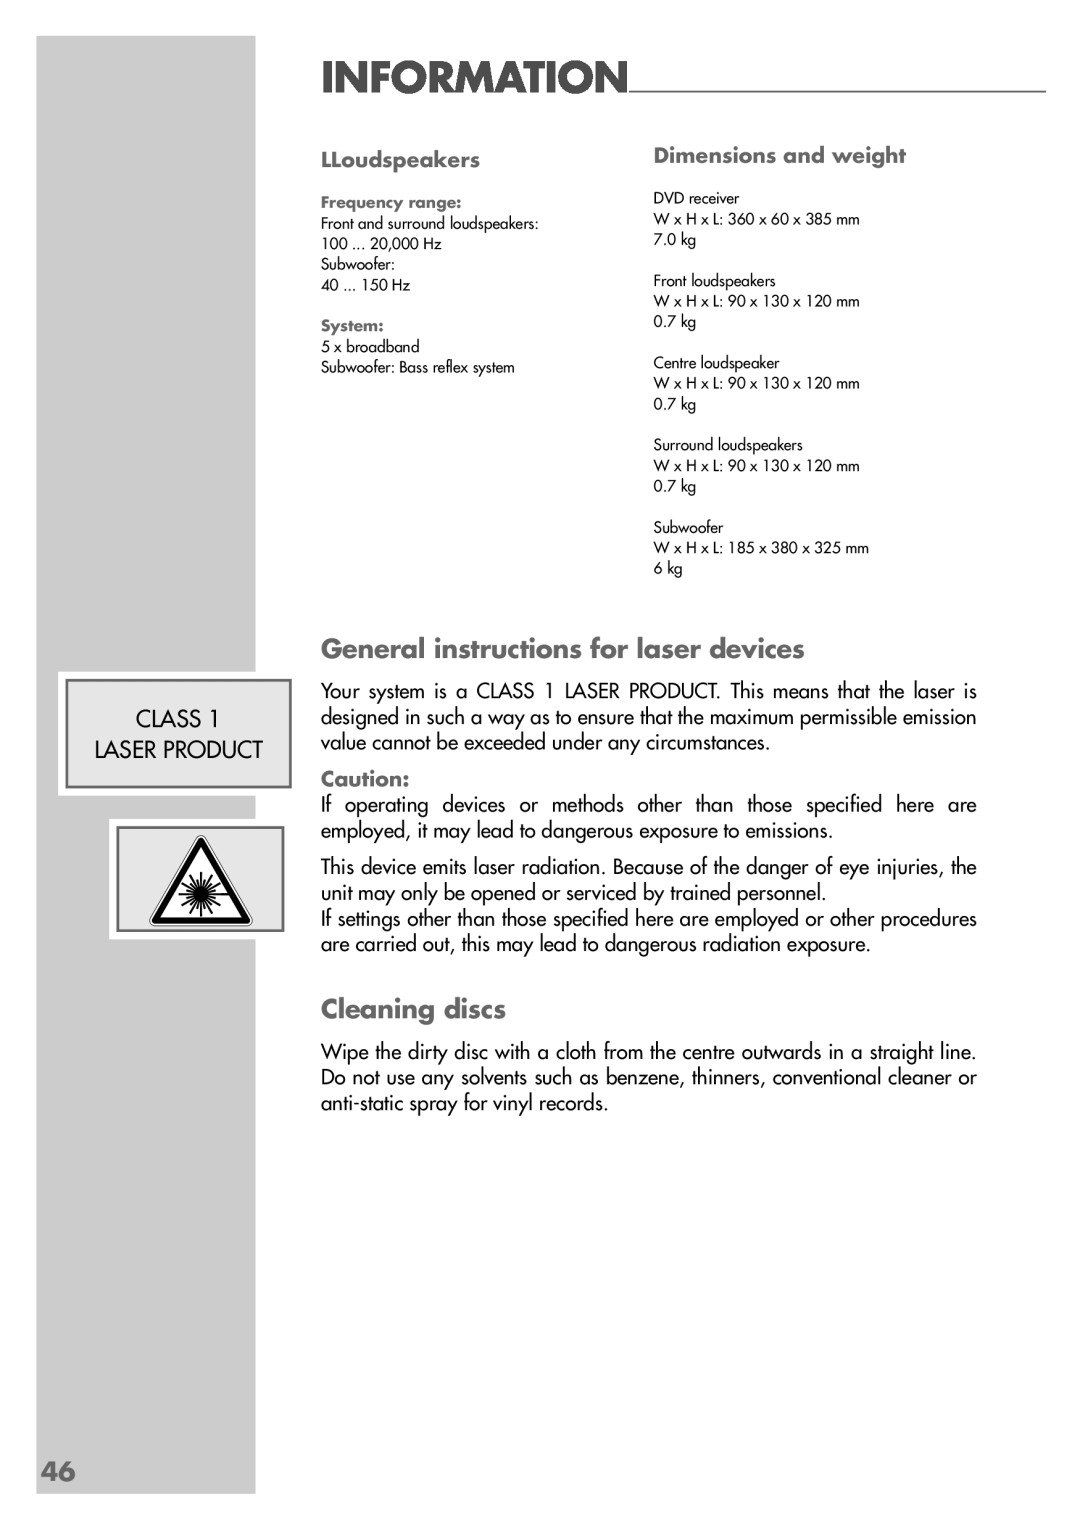 Grundig DR 5400 DD manual General instructions for laser devices, Cleaning discs, Information, Class Laser Product 